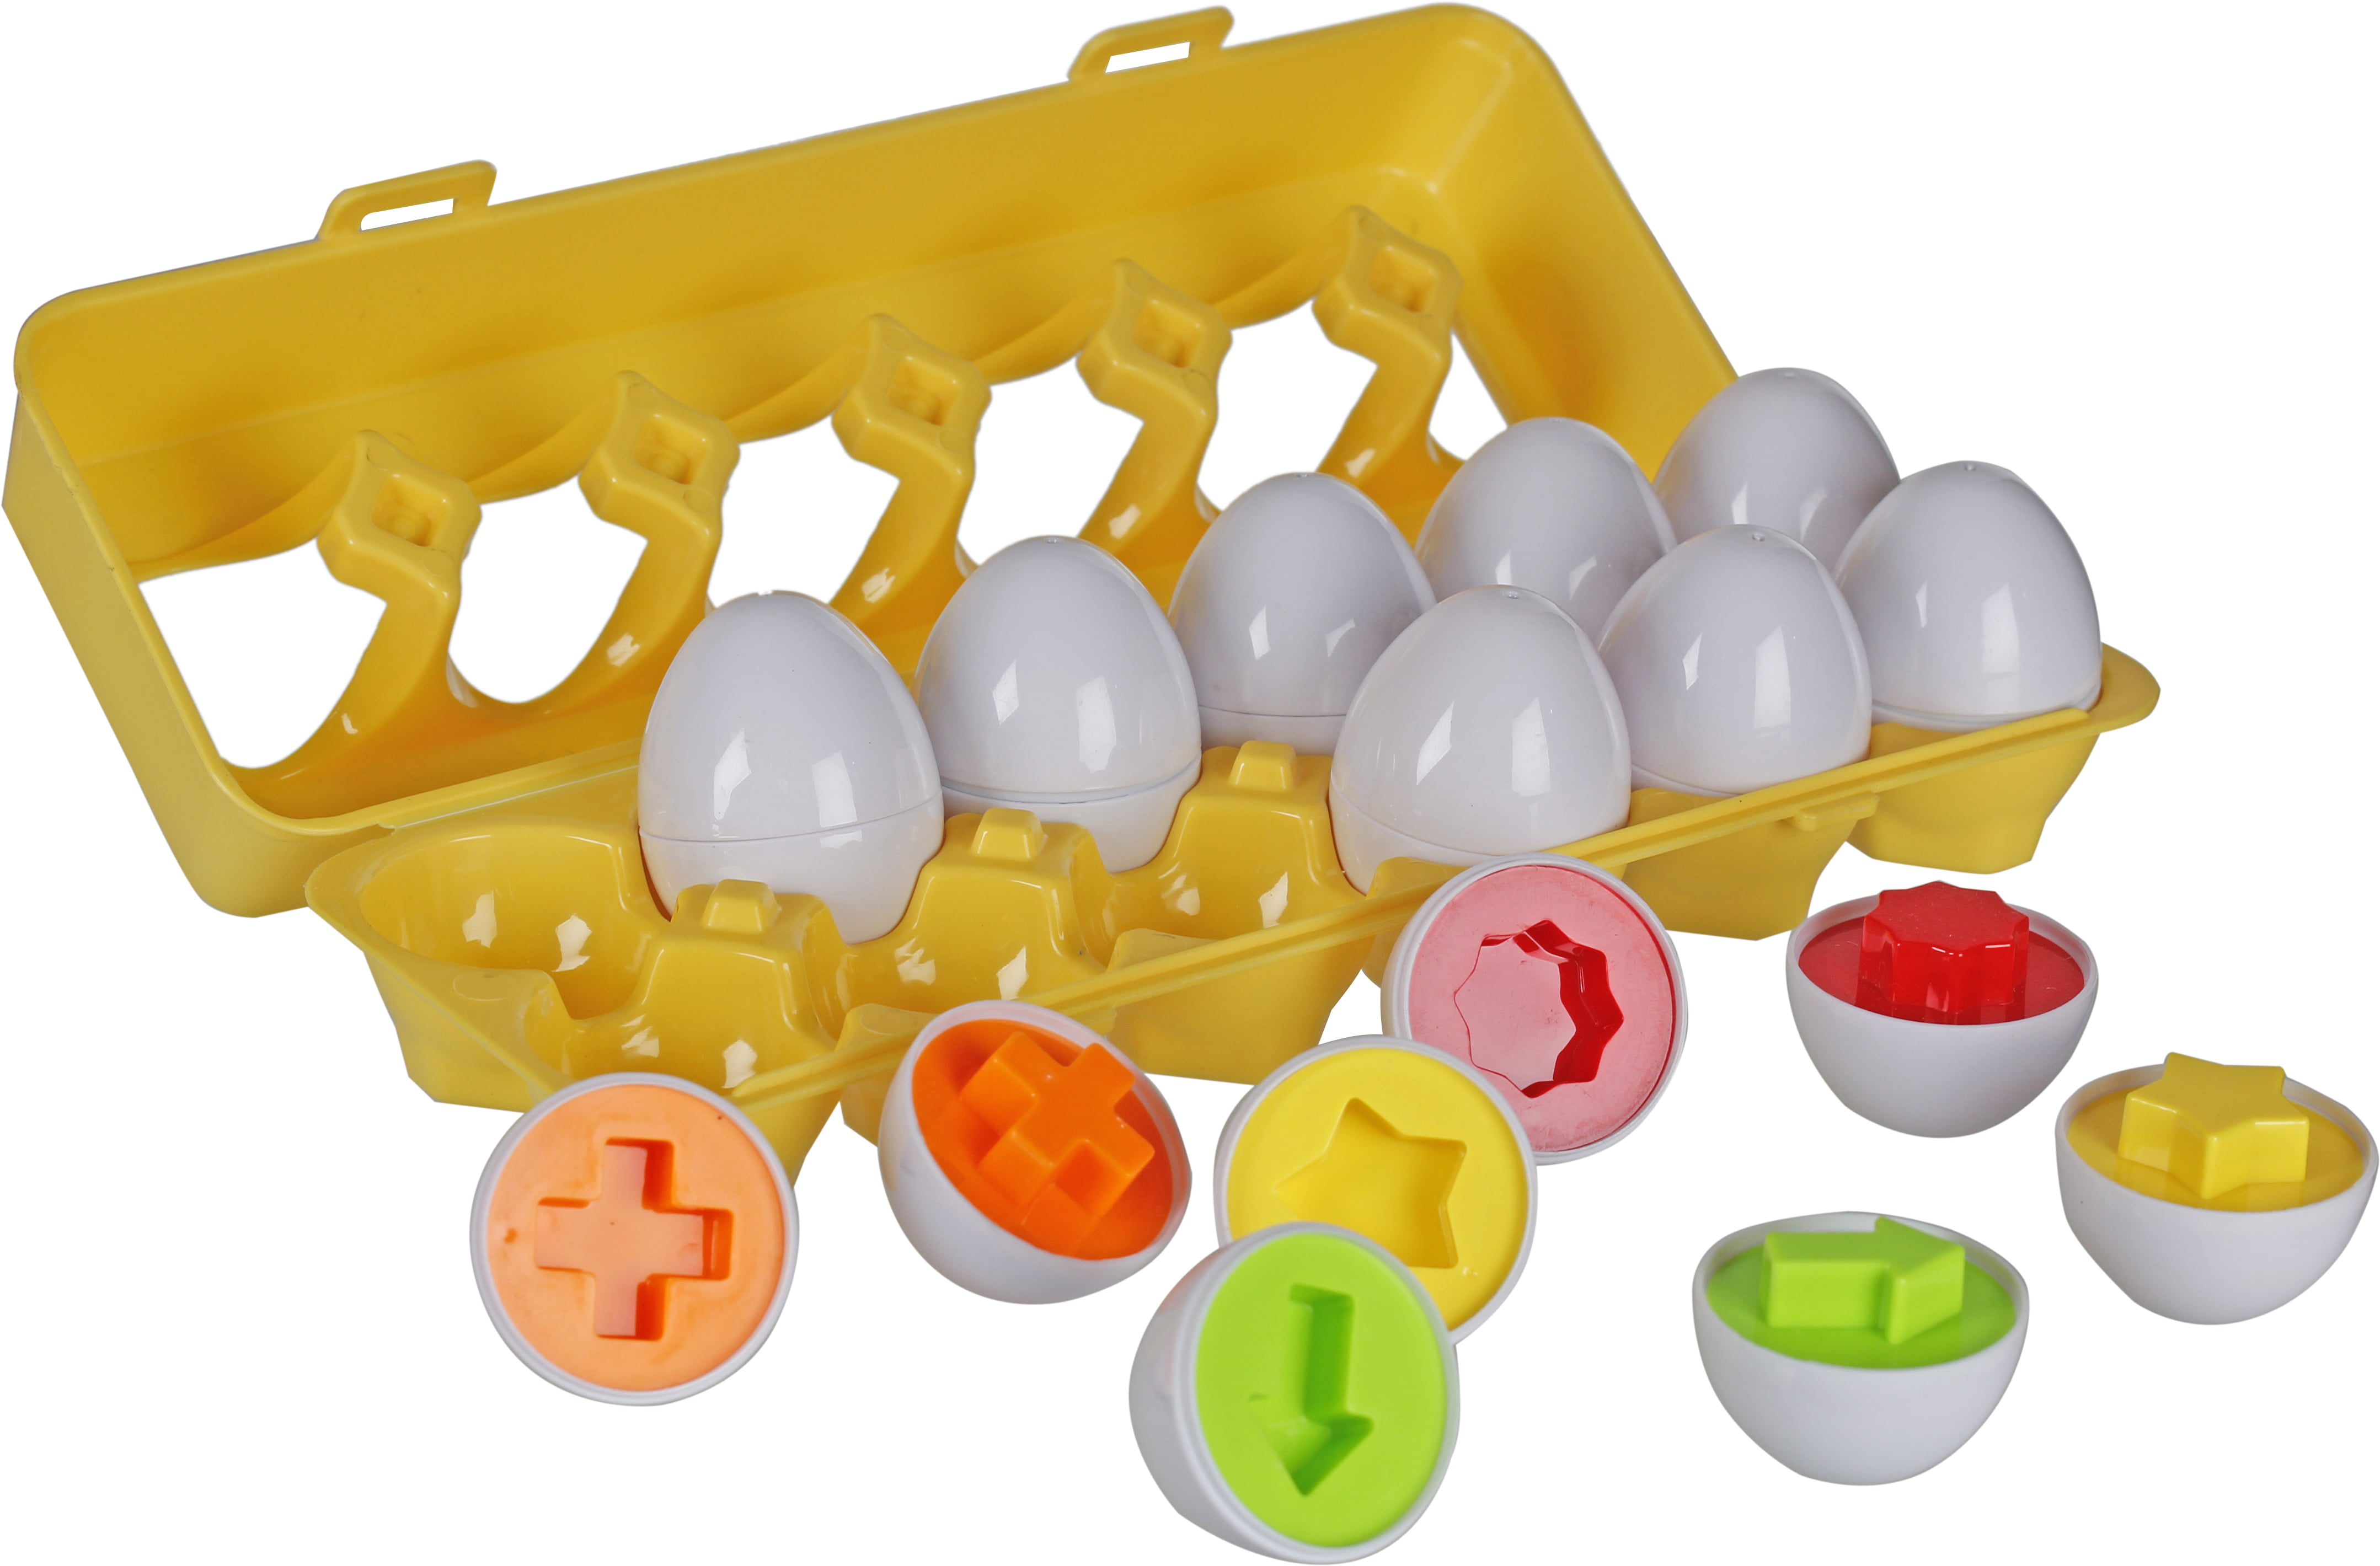 6 Colors And 12 Shapes for Ages 2 And Up Preschool Education Womdee Toddler Eggs Toys Pack of 12 Children Color Matching Egg Set /& Kids Shape Recognition Easter Eggs